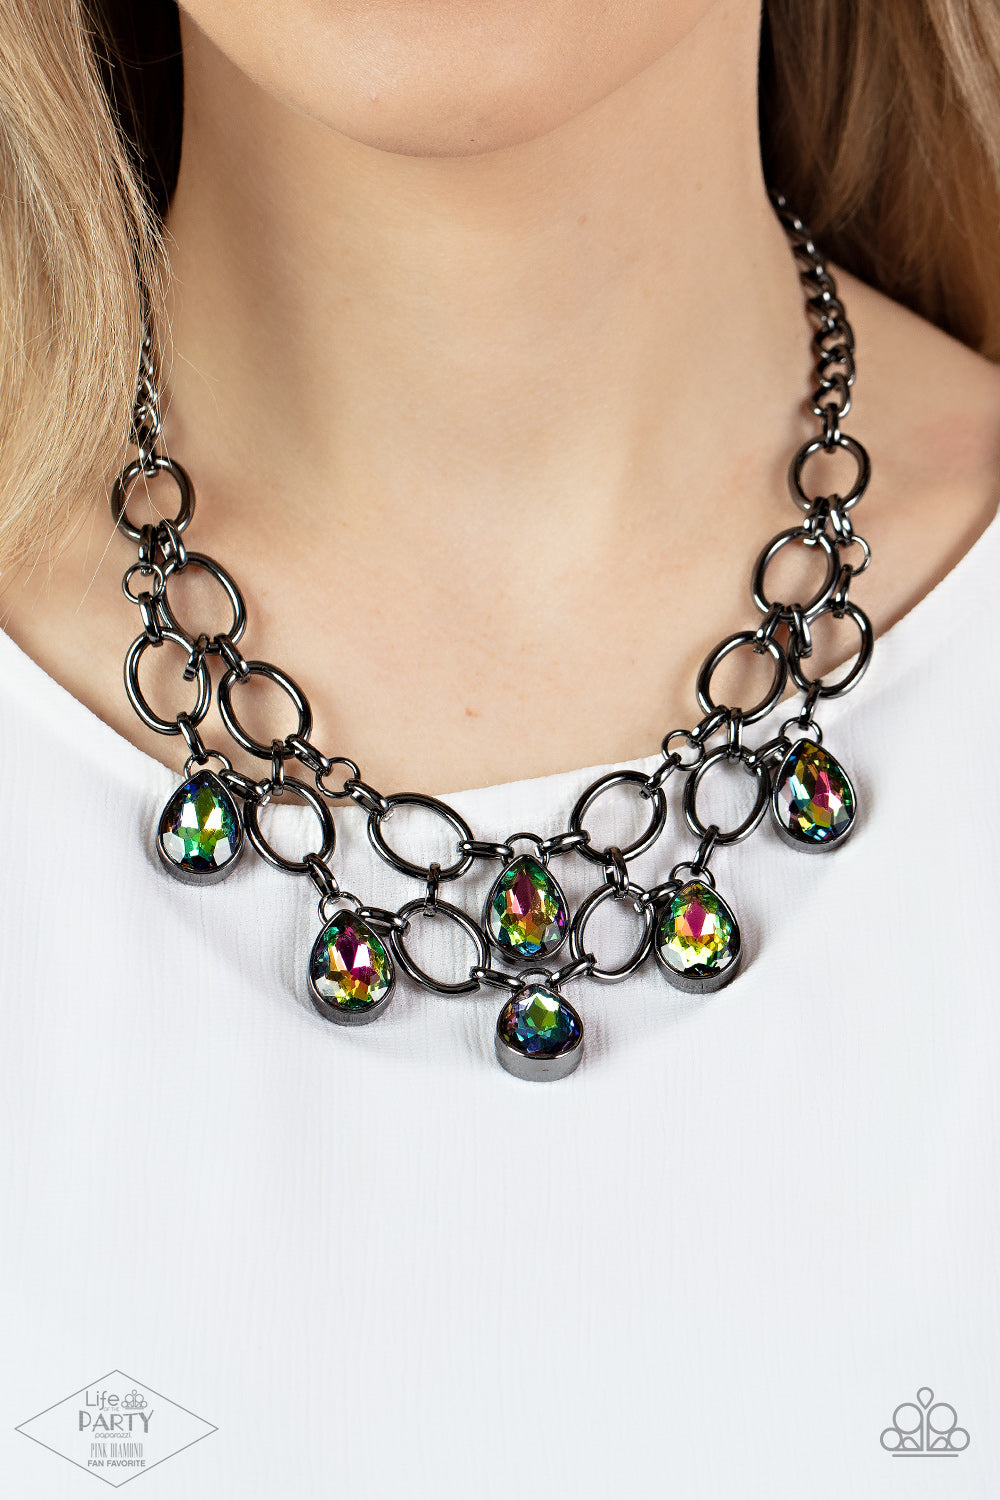 Joined by dainty gunmetal links, two rows of dramatic gunmetal chain layer below the collar in a fierce fashion. Oil spill teardrop gems drip from the glistening layers, adding a timeless shimmer to the show-stopping piece. Features an adjustable clasp closure.  Sold as one individual necklace. Includes one pair of matching earrings.   FANFAVORITE